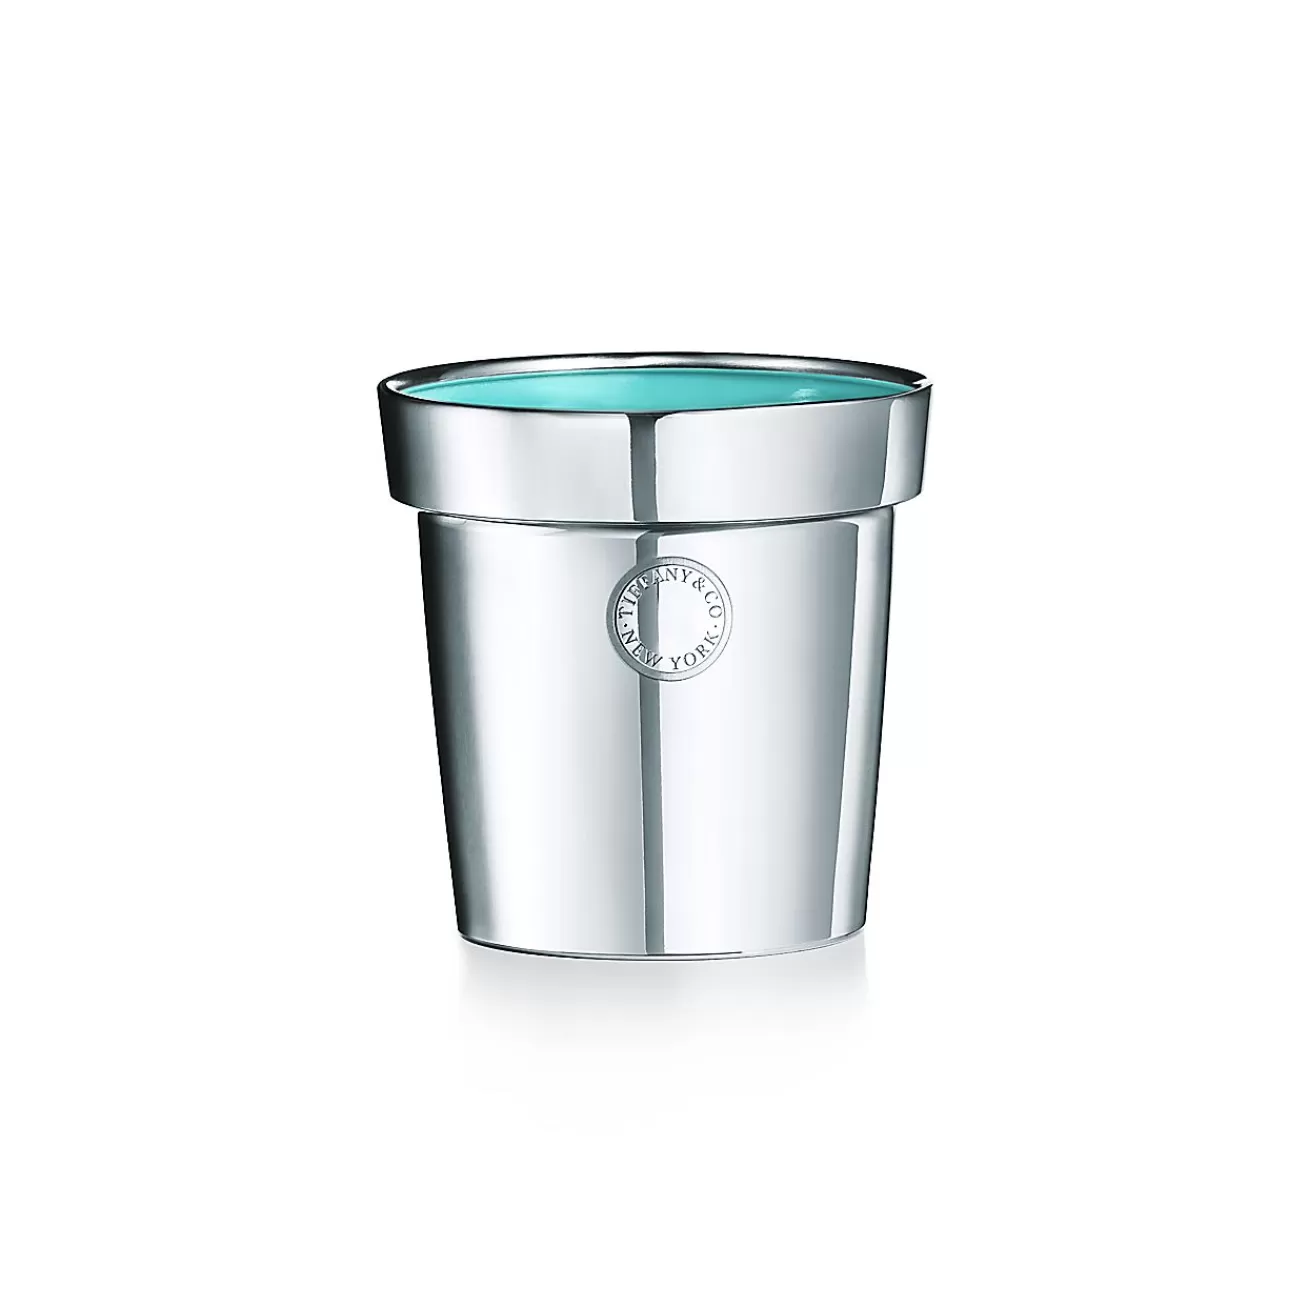 Tiffany & Co. Everyday Objects sterling silver flowerpot. | ^ The Home | Housewarming Gifts